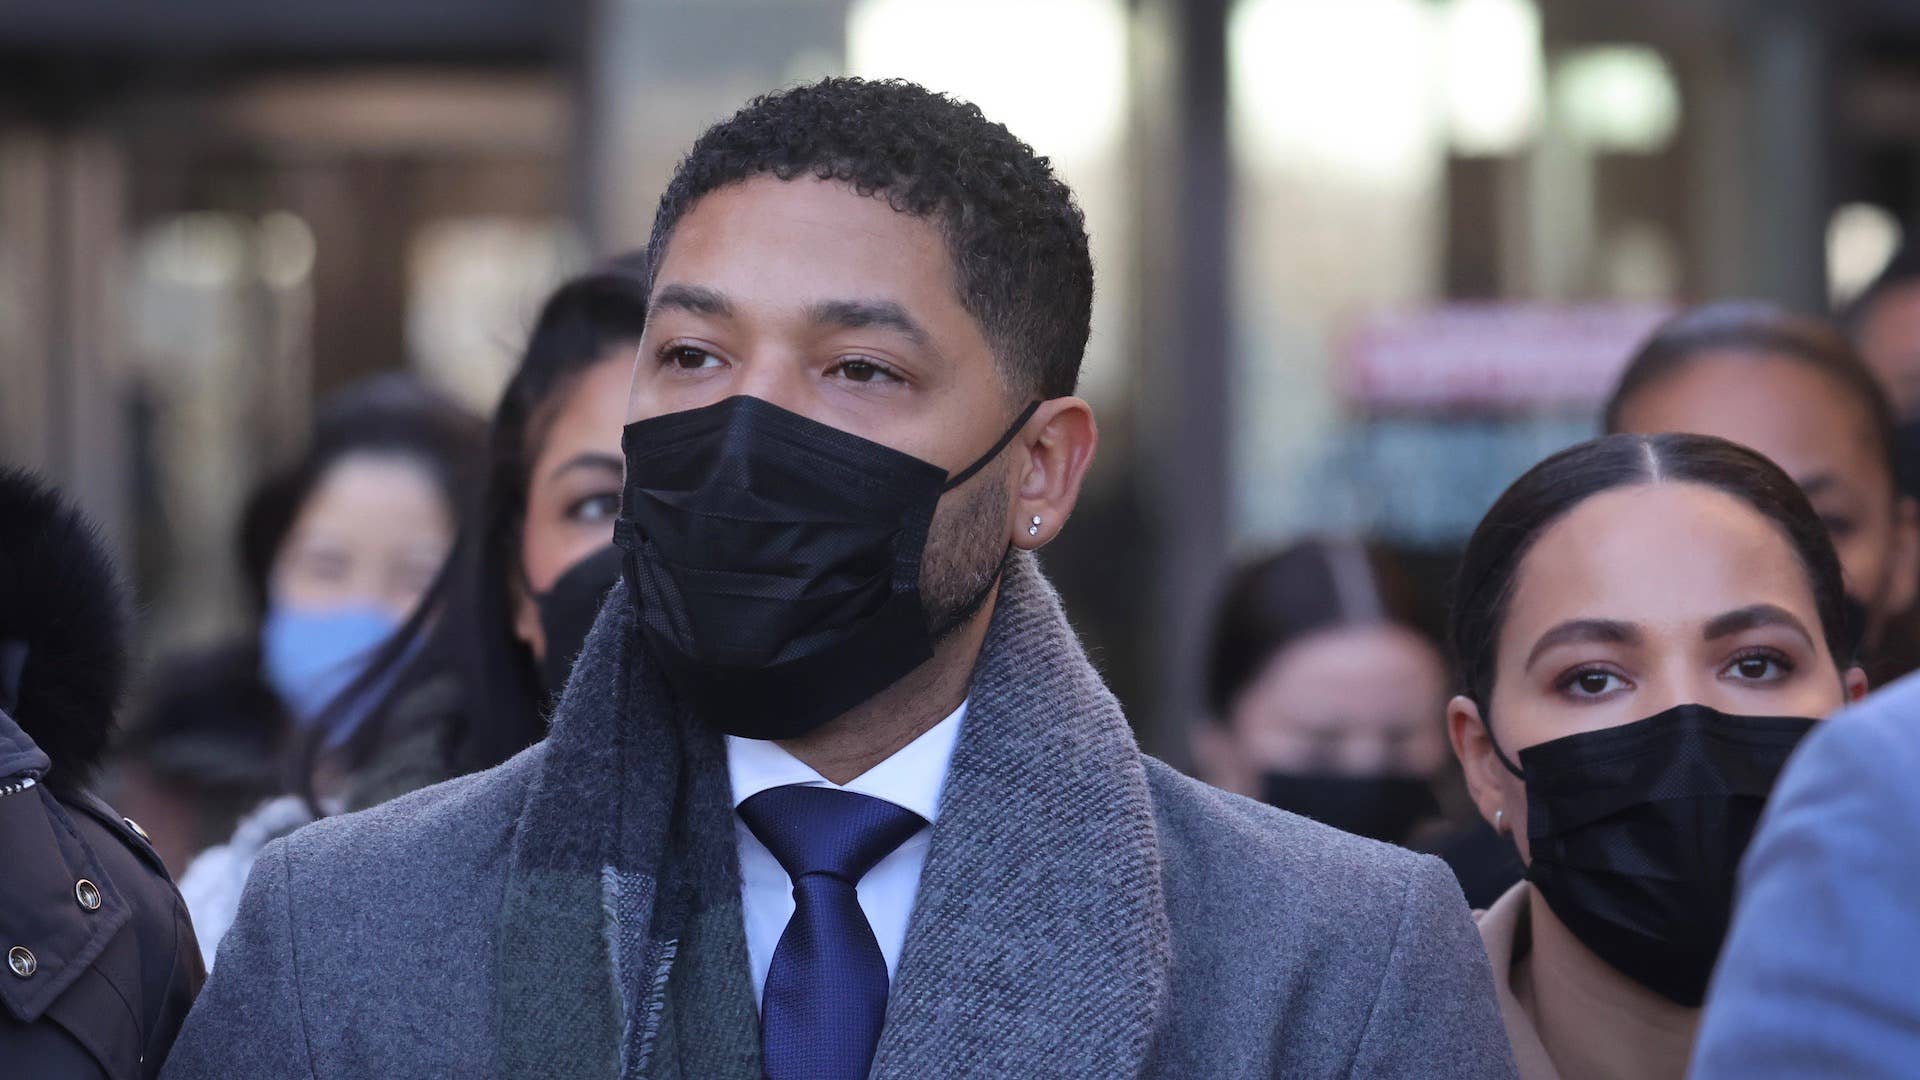 Former "Empire" actor Jussie Smollett leaves the Leighton Criminal Courts